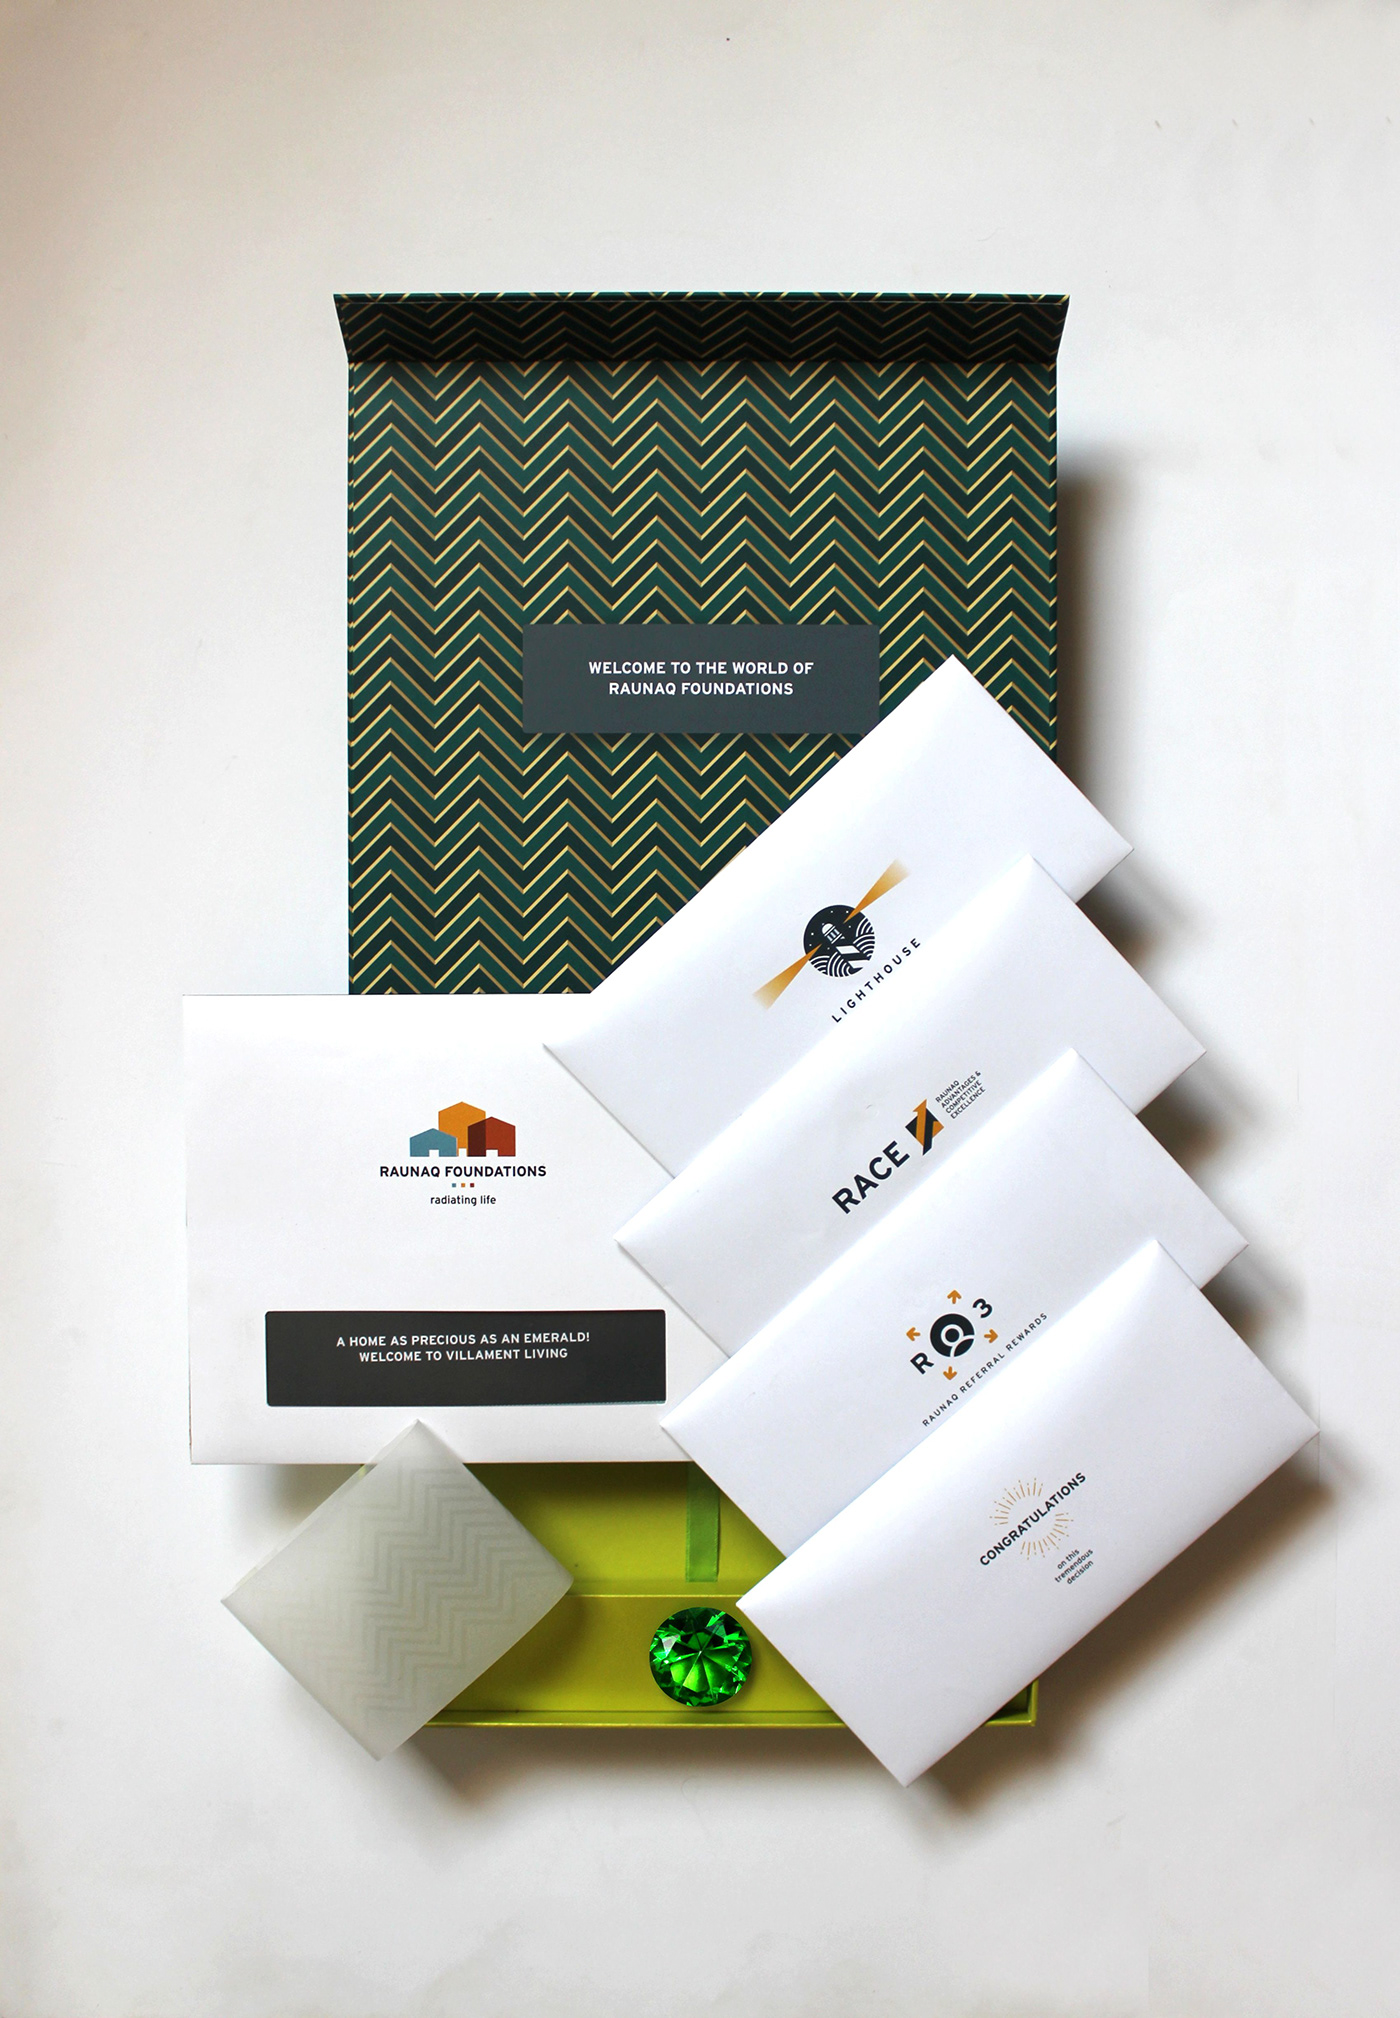 Innovative welcome Kit welcome kit Real Estate Branding Innovative Direct Mailer LP Magesh mah design strategy Raunaq Emerald real estate advertising Raunaq Foundations emerald